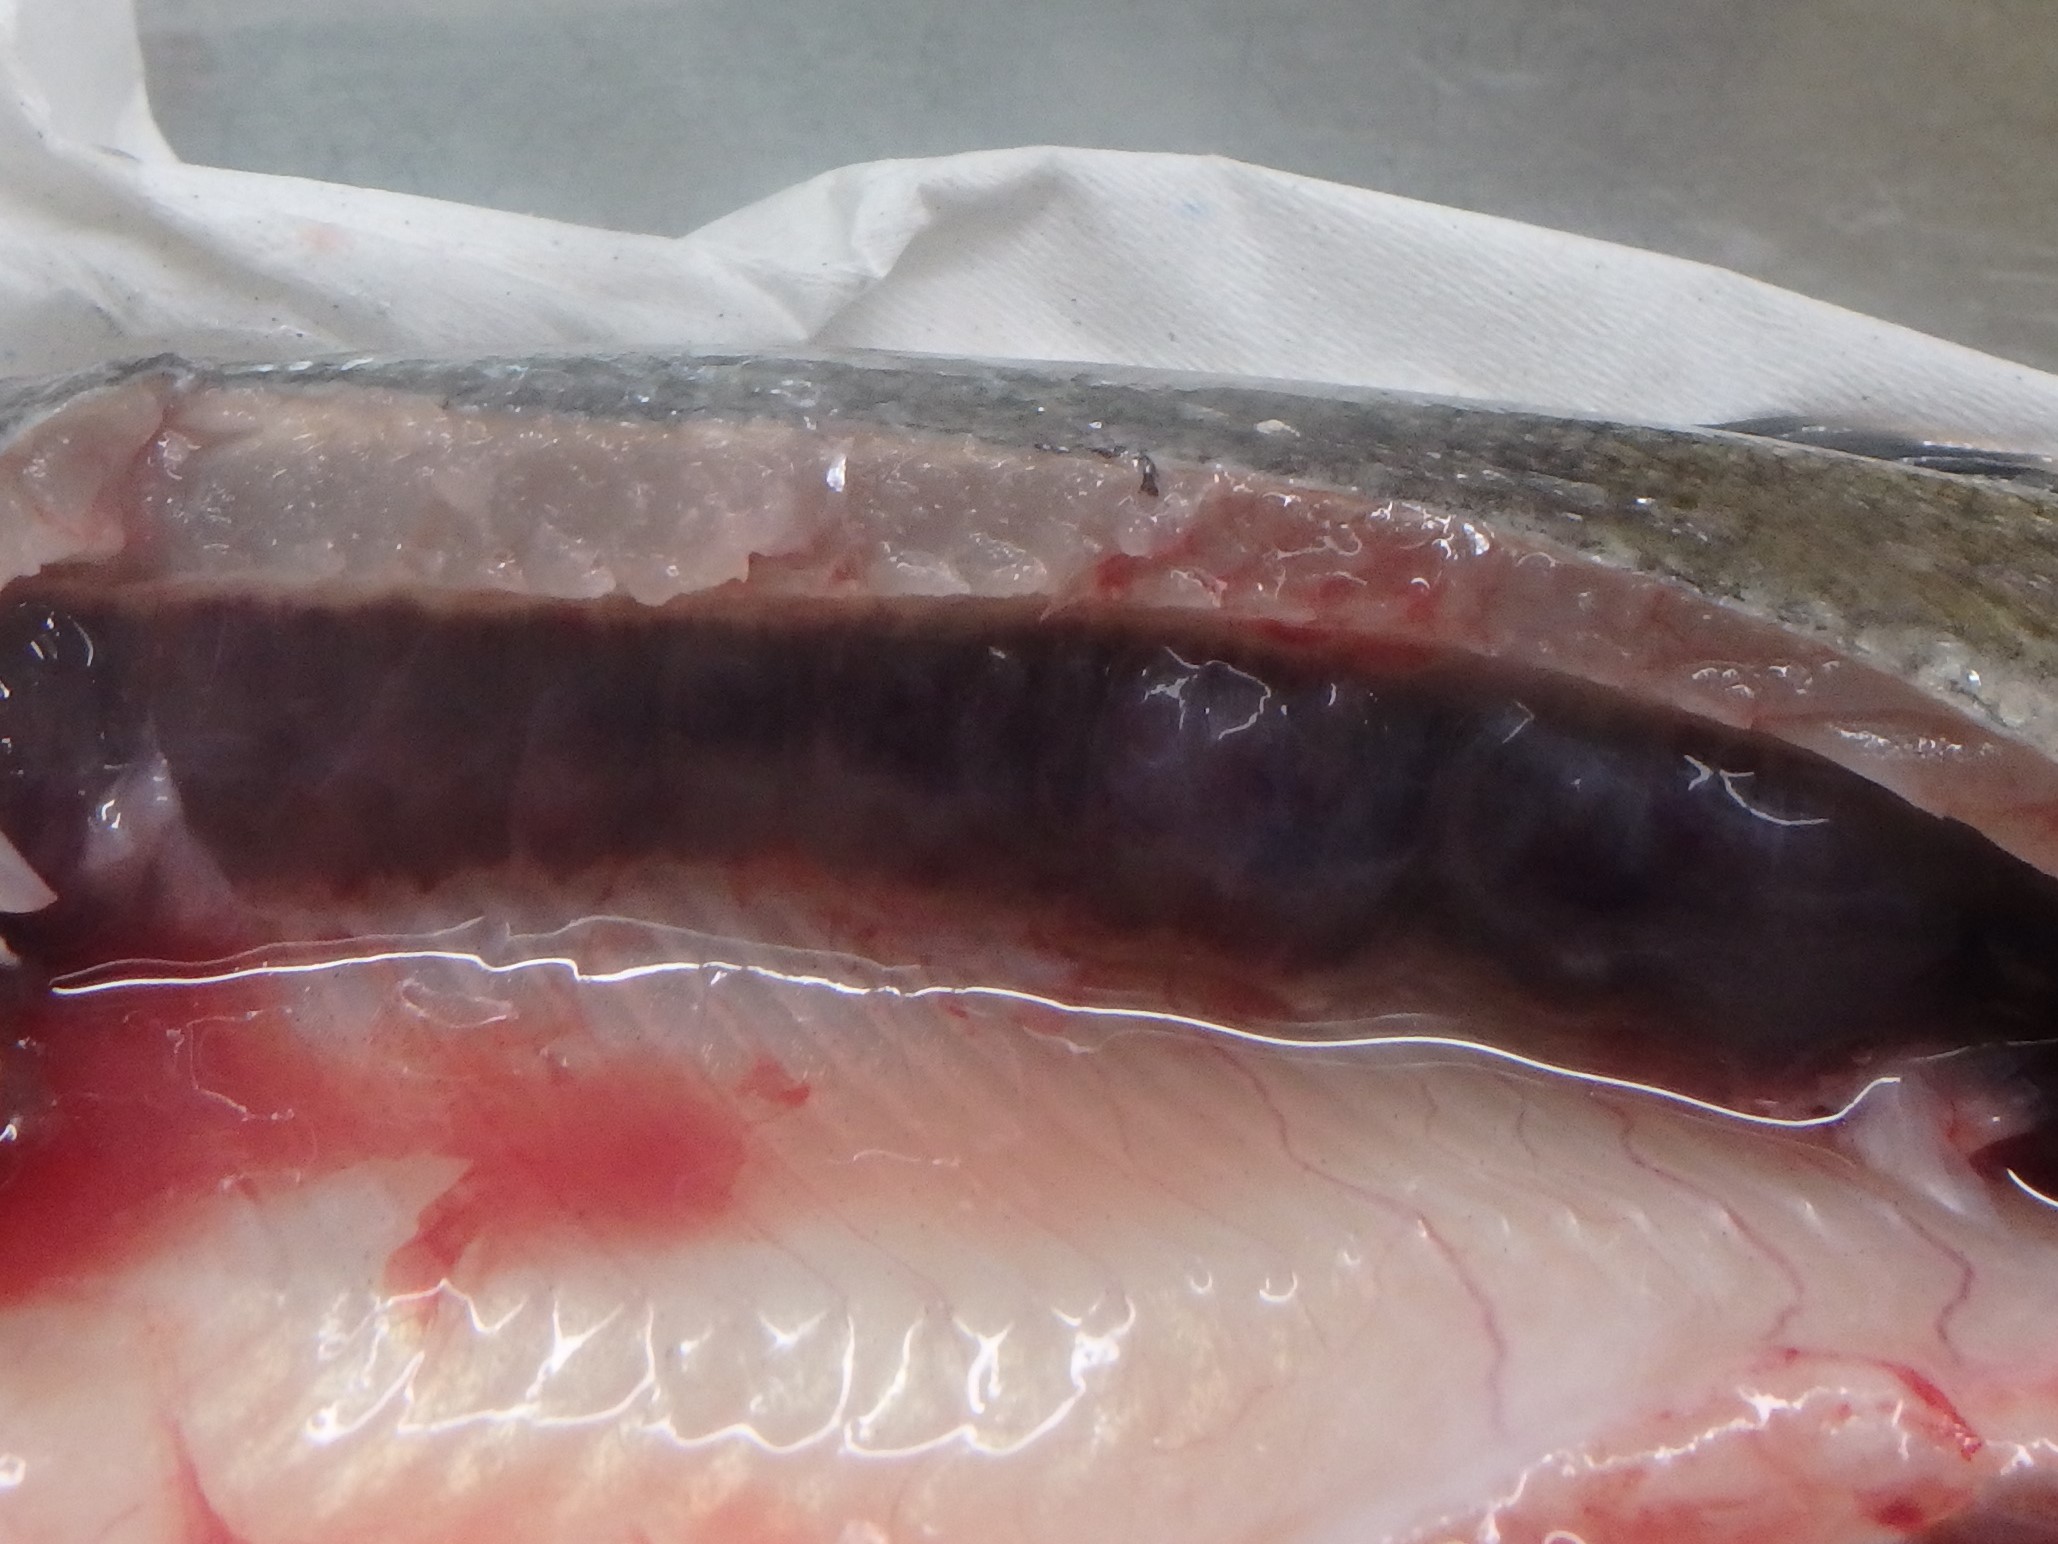 Swelled posterior kidney in rainbow trout affected by the parasite Tetracapsuloides bryosalmonae